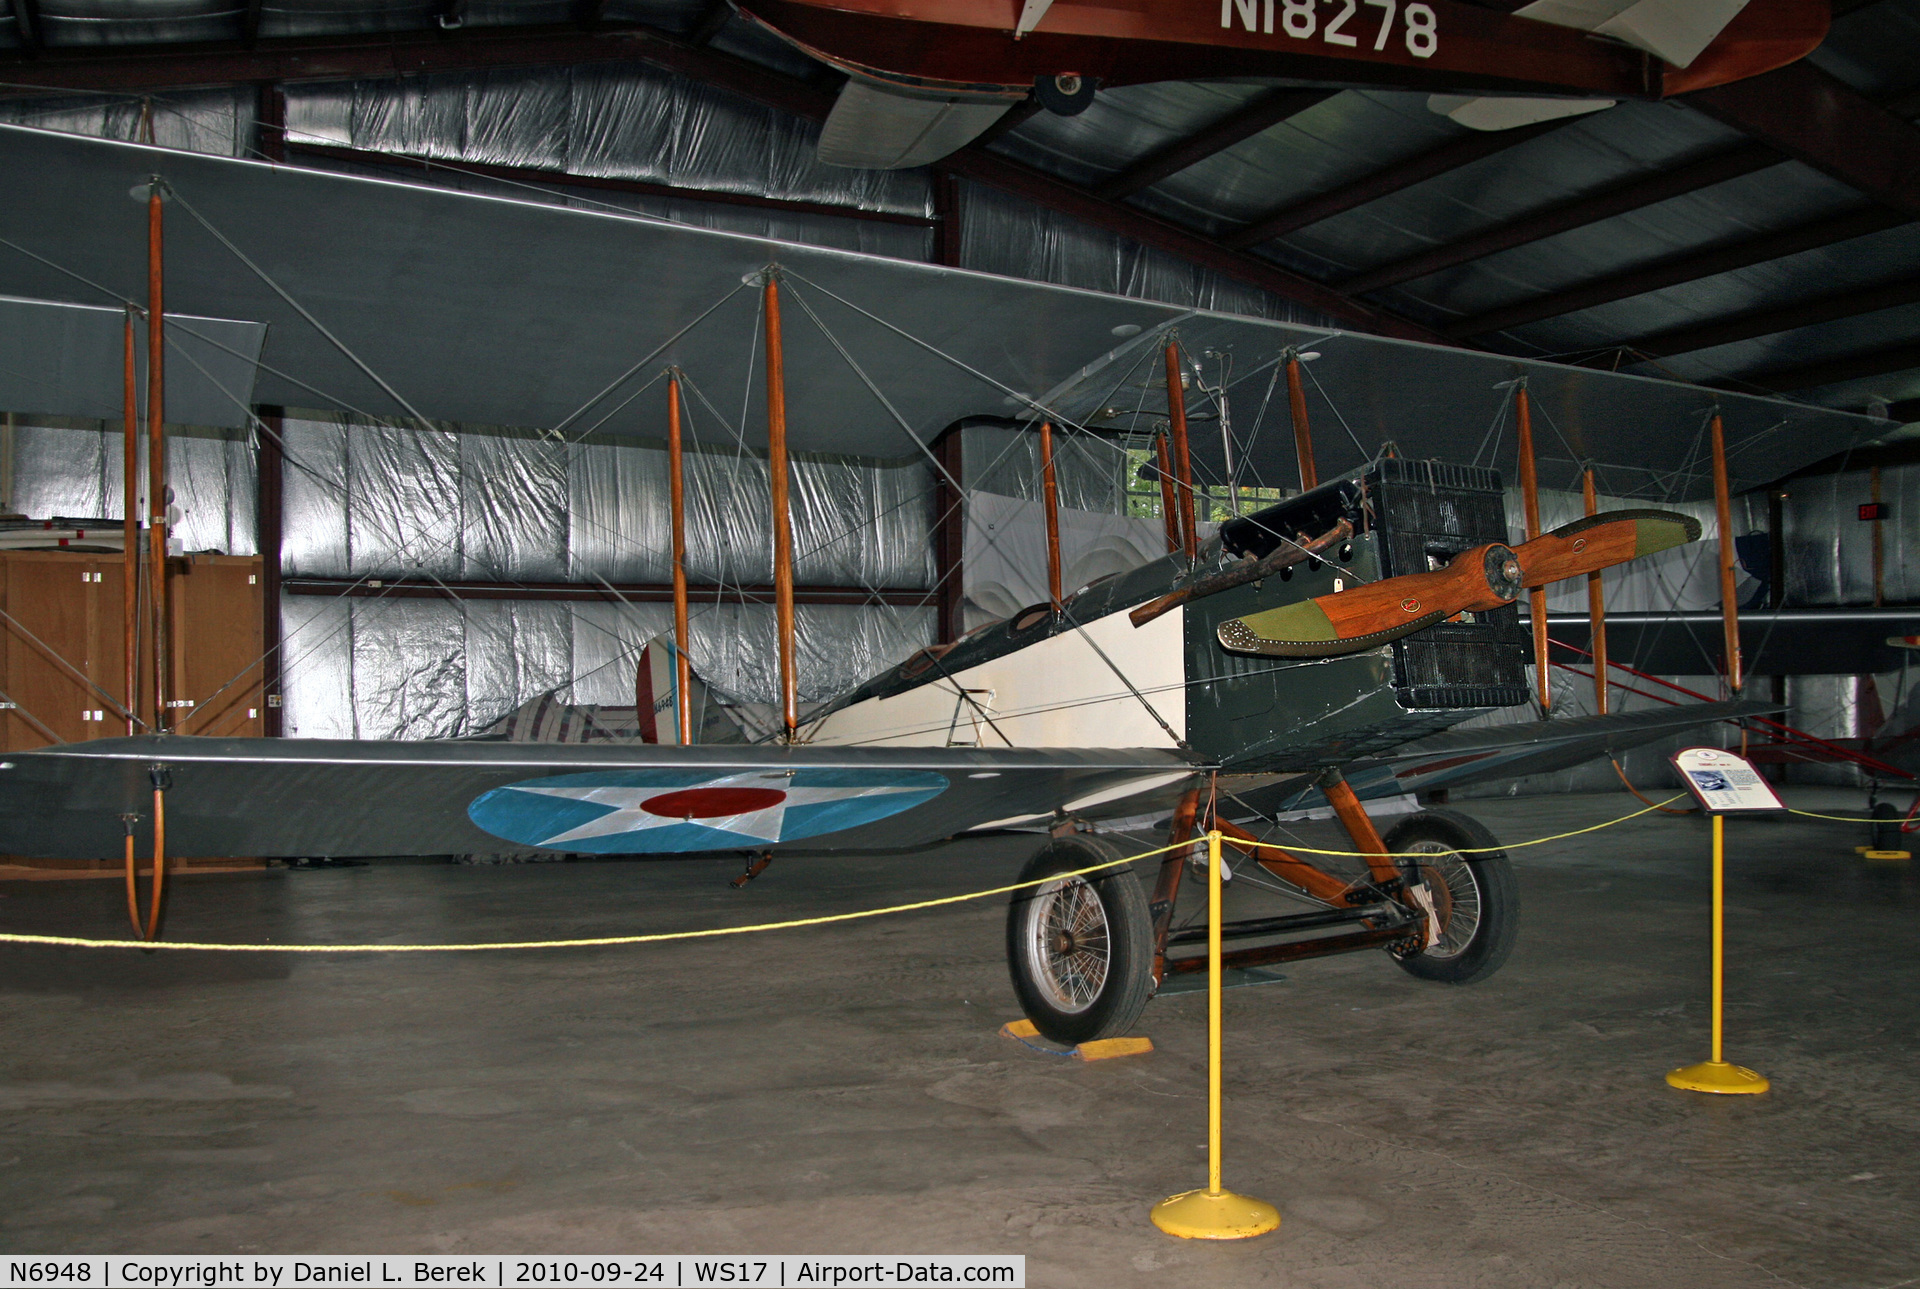 N6948, 1917 Standard J-1 C/N 1956, This lovely 1917 original Standard biplane is displayed with pride at the EAA AirVenture Museum.  This is how she appeared in 2010; soon thereafter, she was painted all yellow, with 